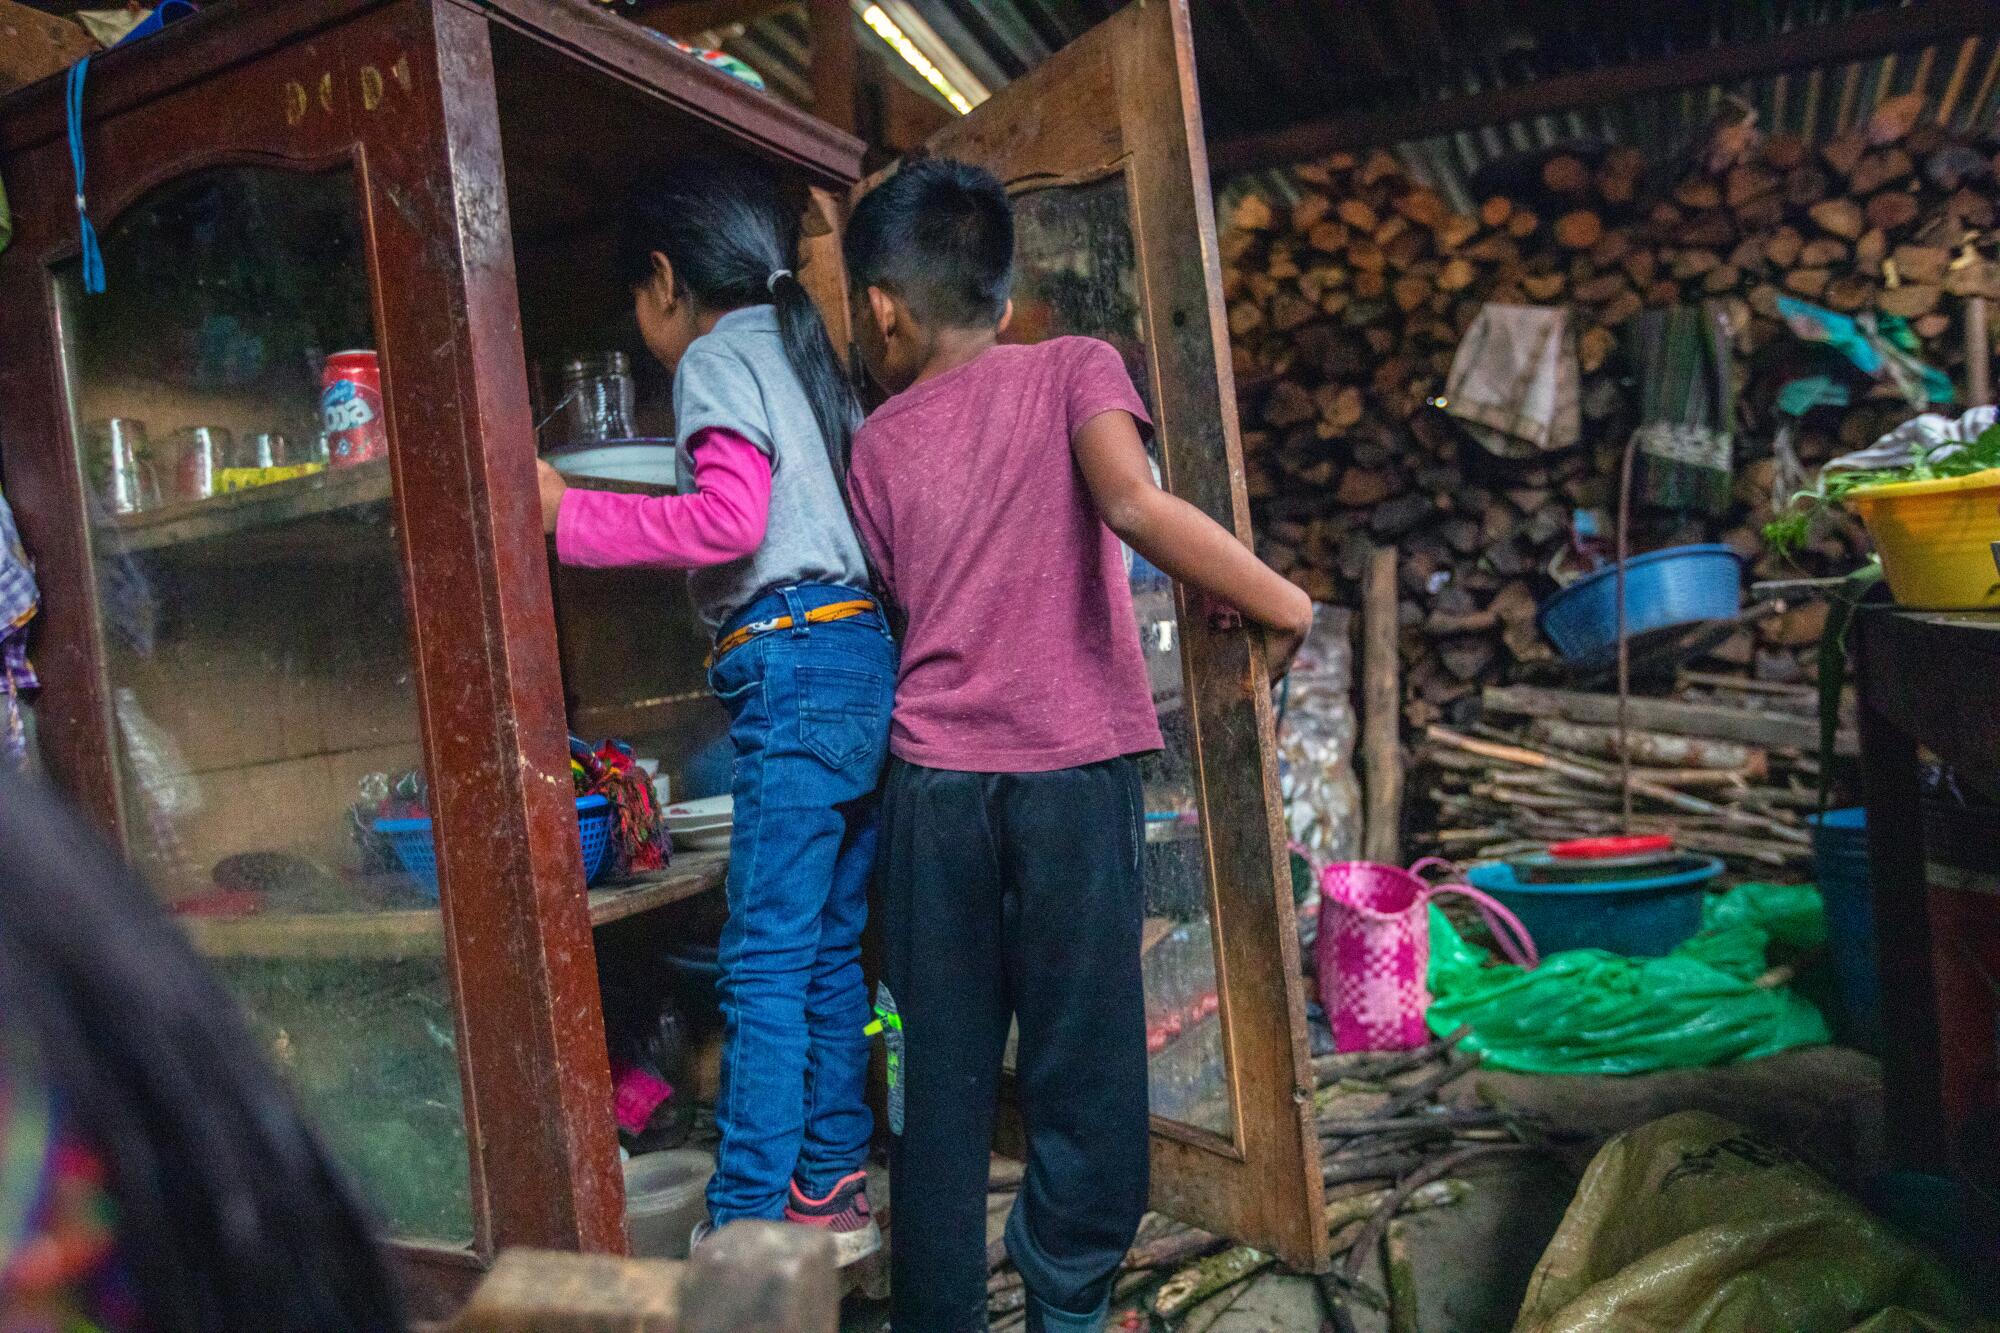 A young girl, left, and a boy check out the contents of a cabinet inset with glass near stacks of firewood